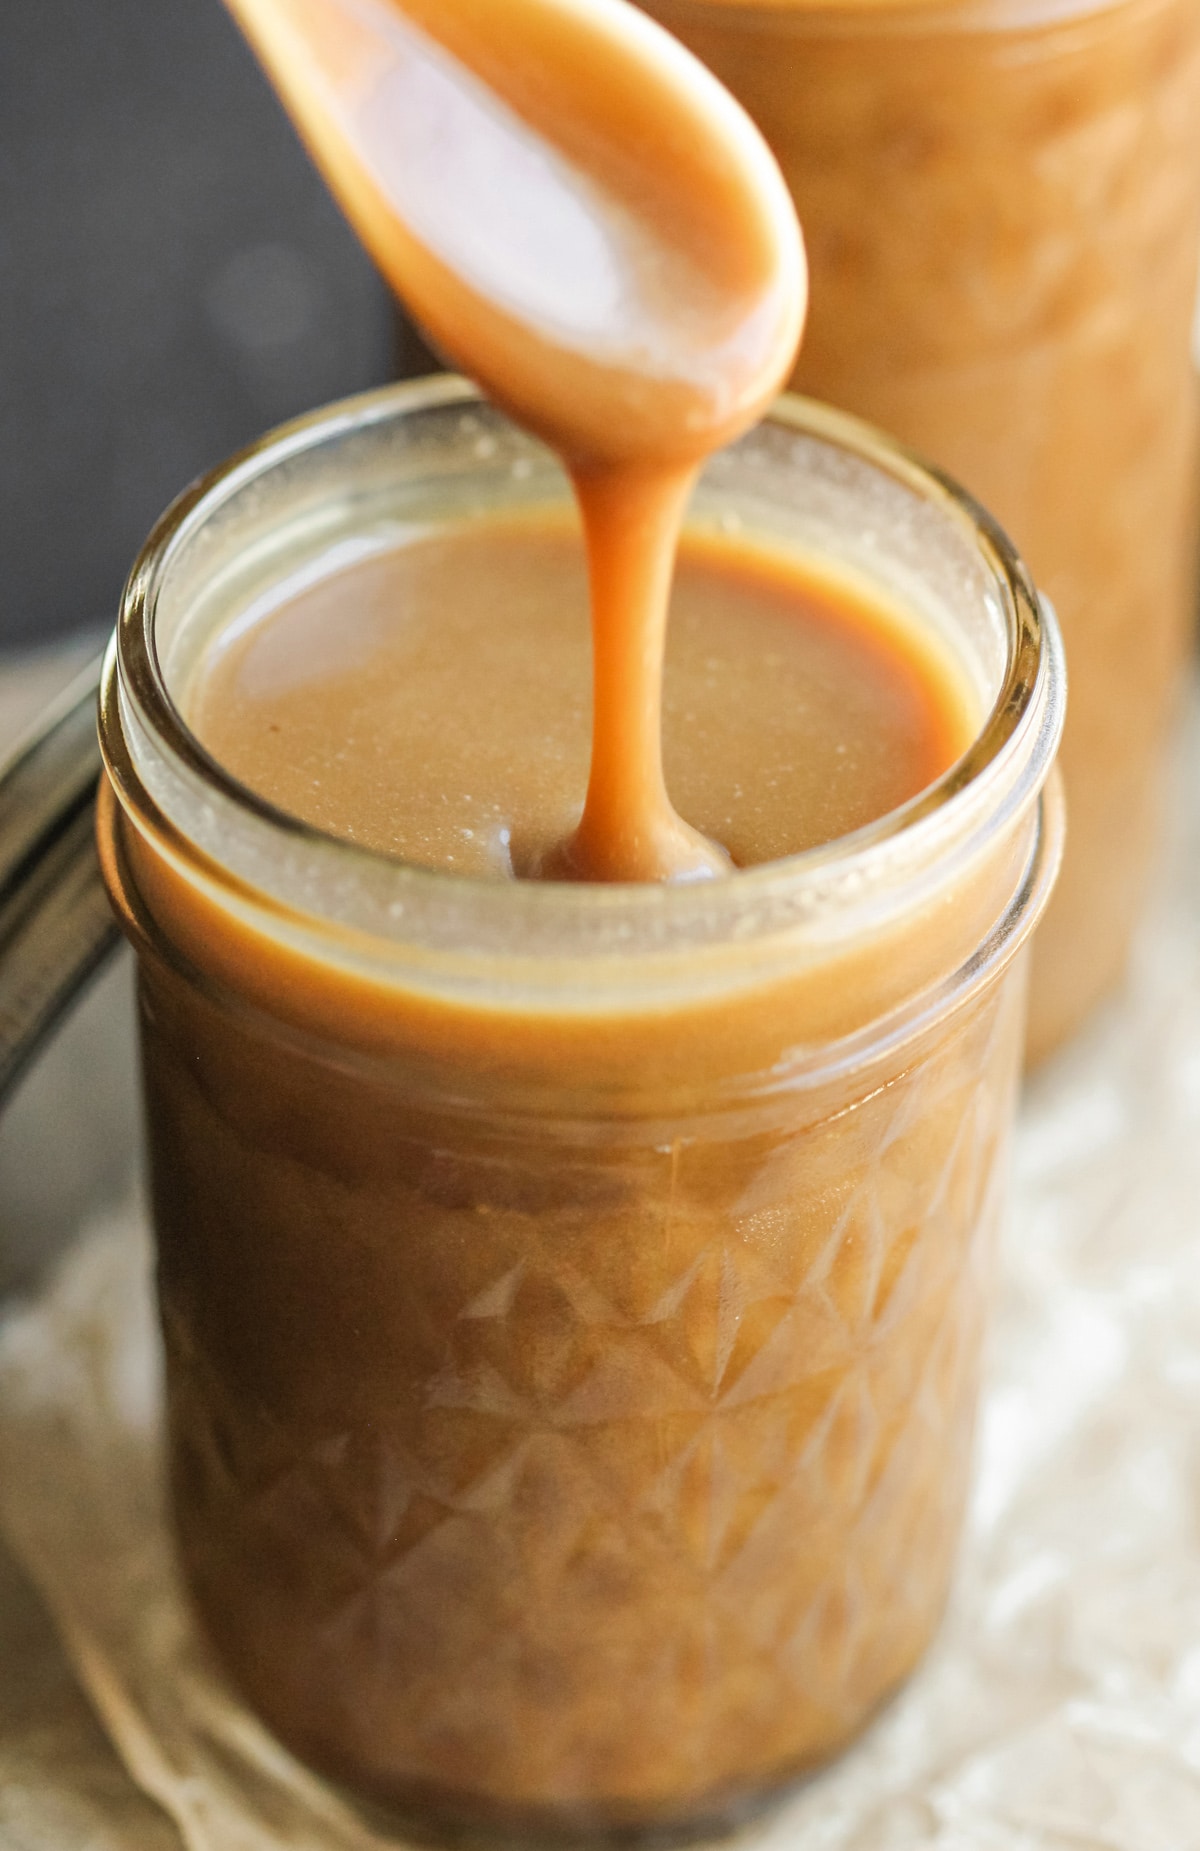 How to make Healthy Homemade Caramel Sauce! This sweet and velvety caramel sauce is made without the white sugar, corn syrup, heavy cream, and butter, but you’d never know it. And did I mention it’s vegan, dairy free, and gluten free too? Don’t buy caramel sauce, DIY it! -- Healthy Dessert Recipes with sugar free, low calorie, low fat, high protein, gluten free, dairy free, and vegan options at the Desserts With Benefits Blog (www.DessertsWithBenefits.com)